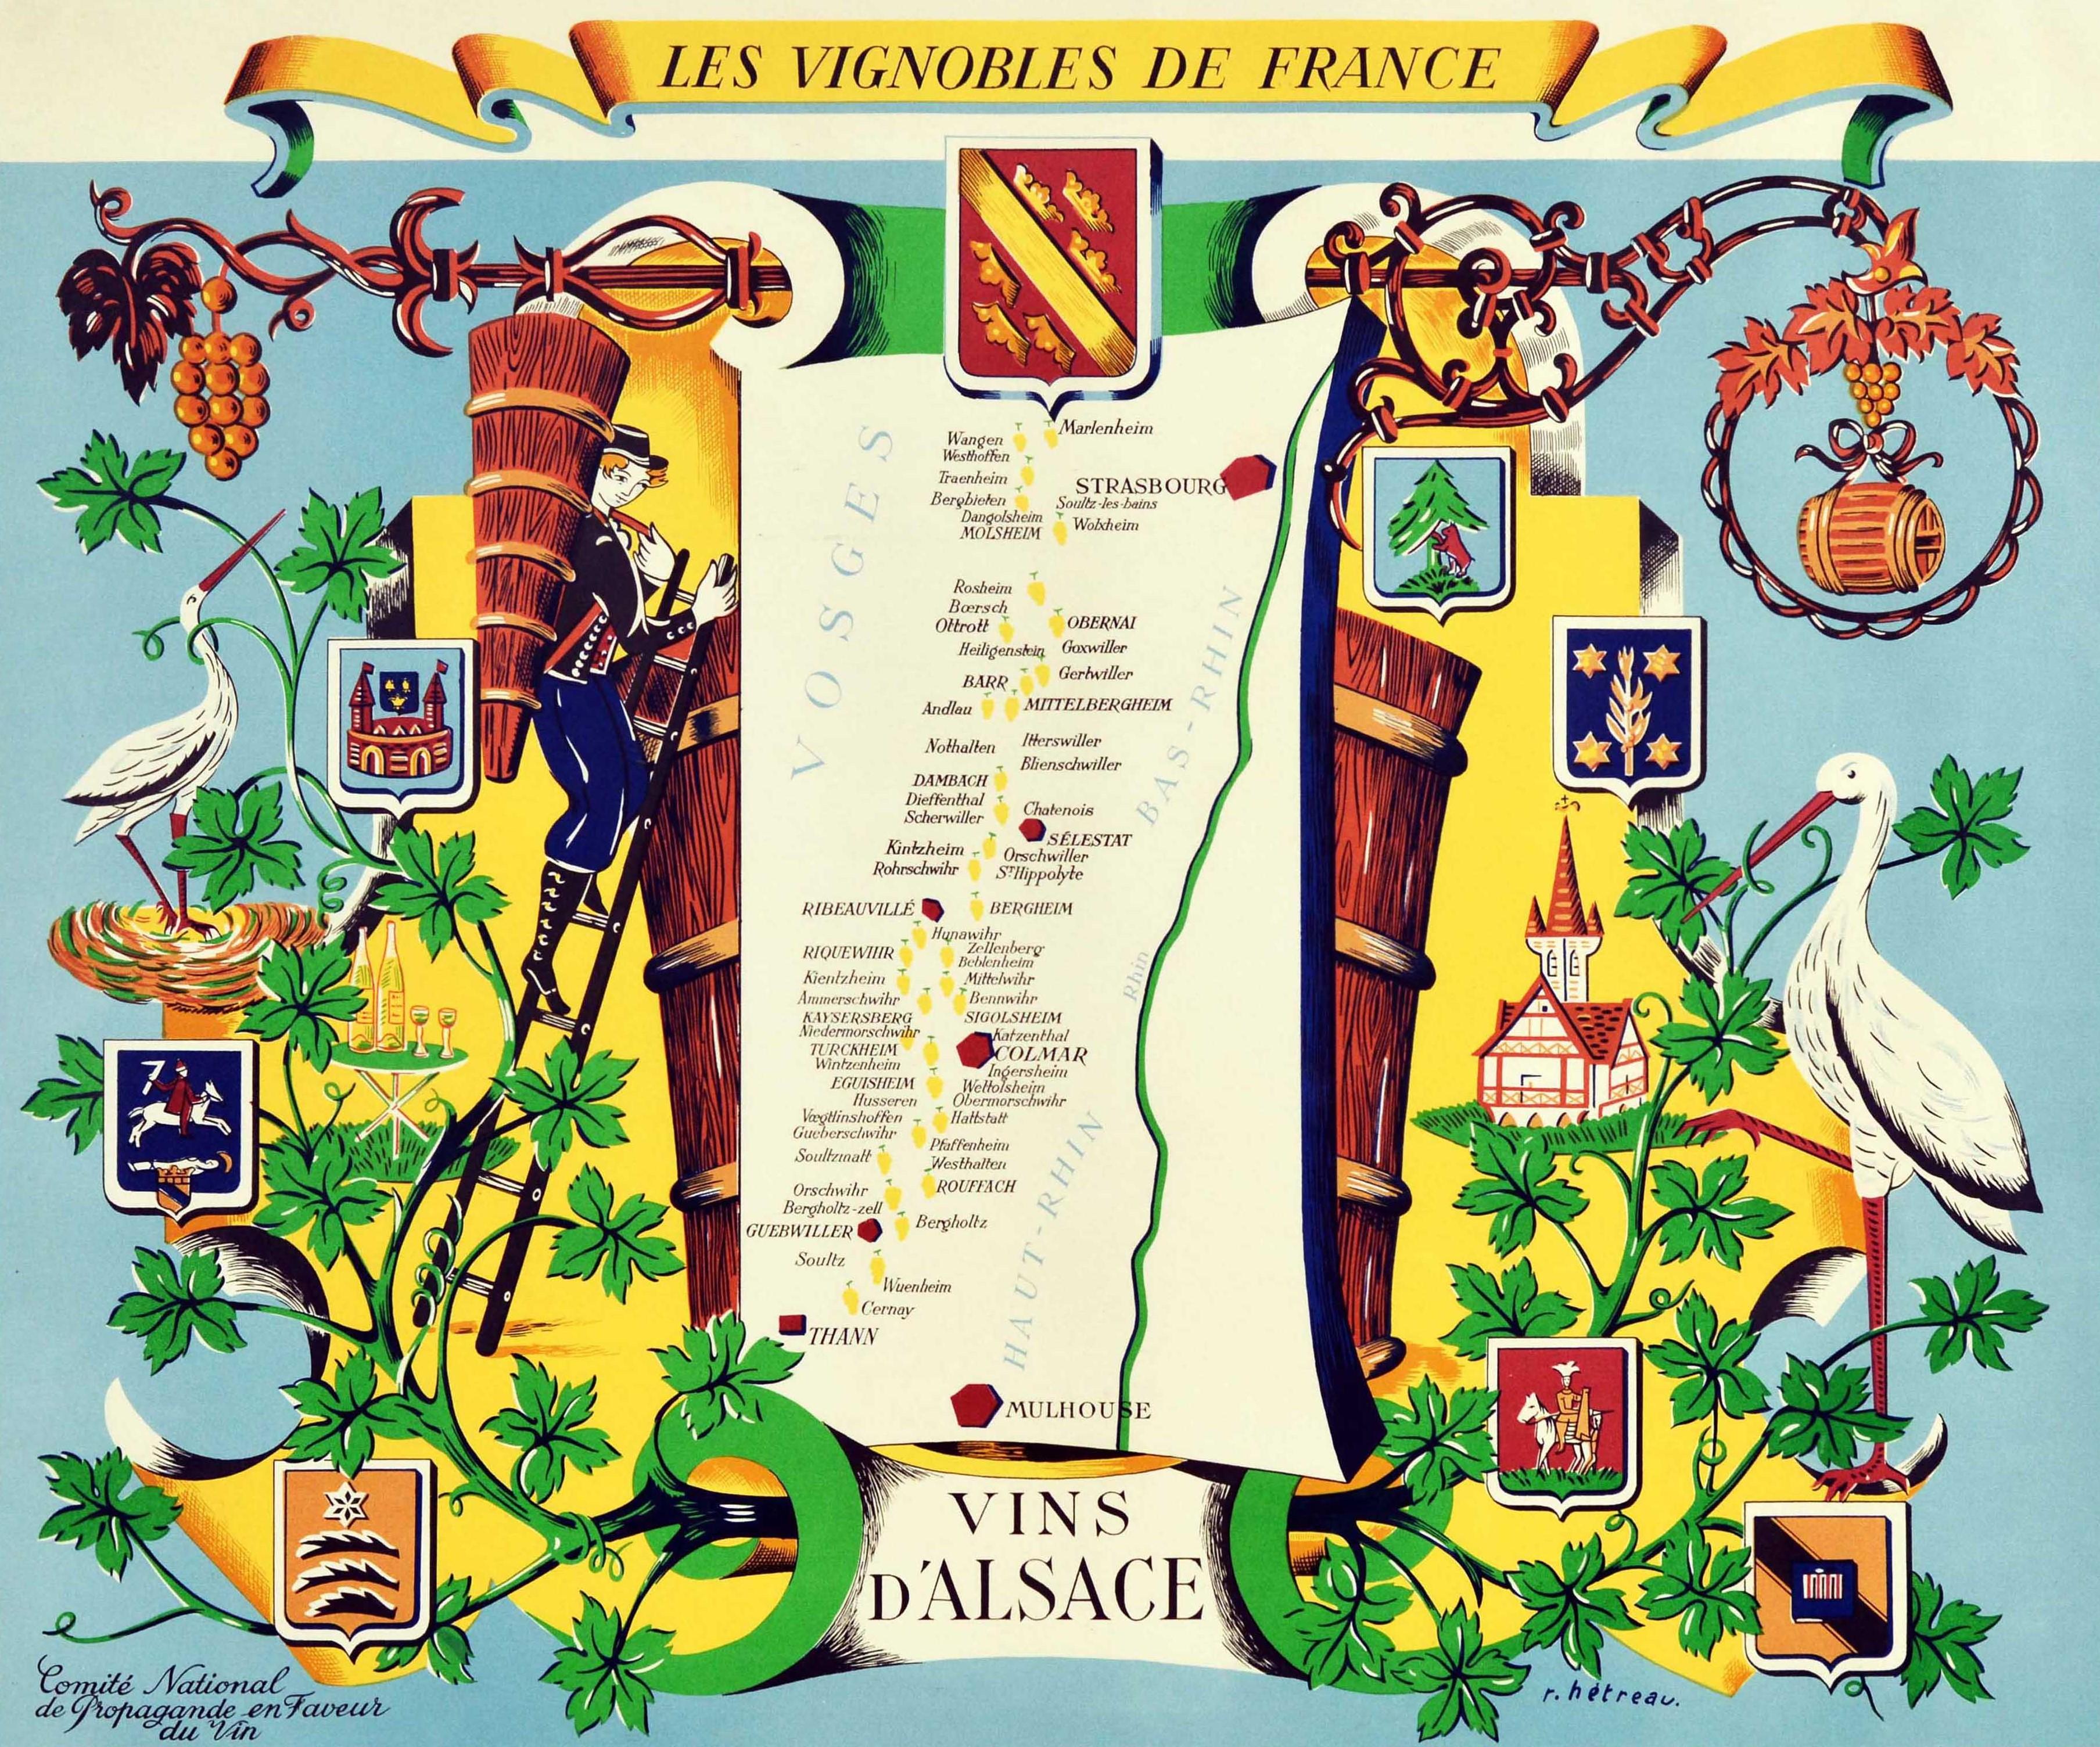 Original vintage drink advertising poster promoting French wines (one of a series issued by the Comite National de Propagande en Faveur du Vin national committee for the promotion of wine): Les Vignobles de France Vins d'Alsace / The French